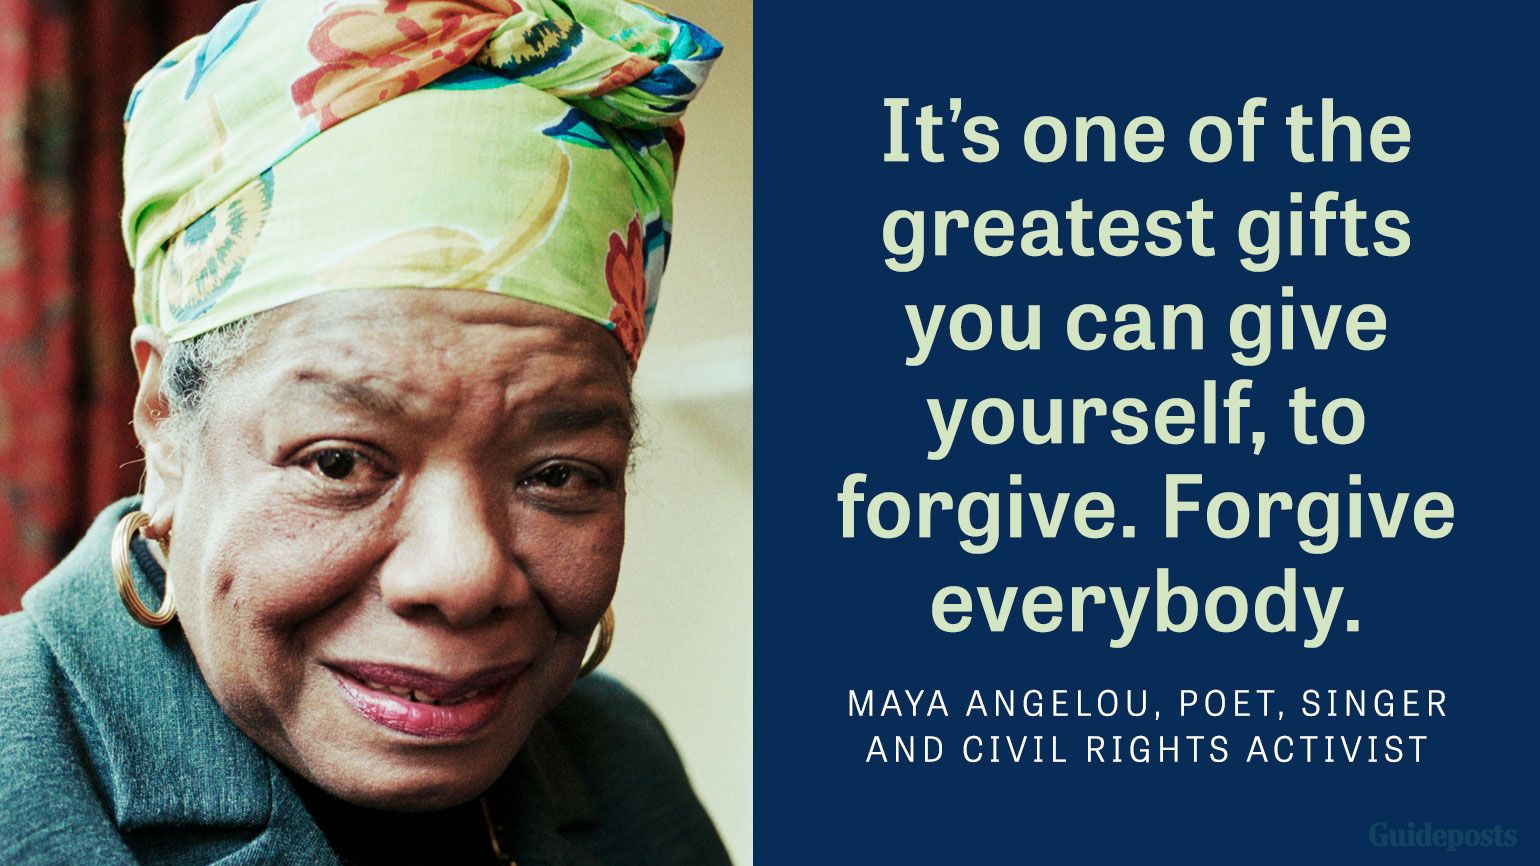 It's one of the greatest gifts you can give to yourself, to forgive. Forgive everybody.